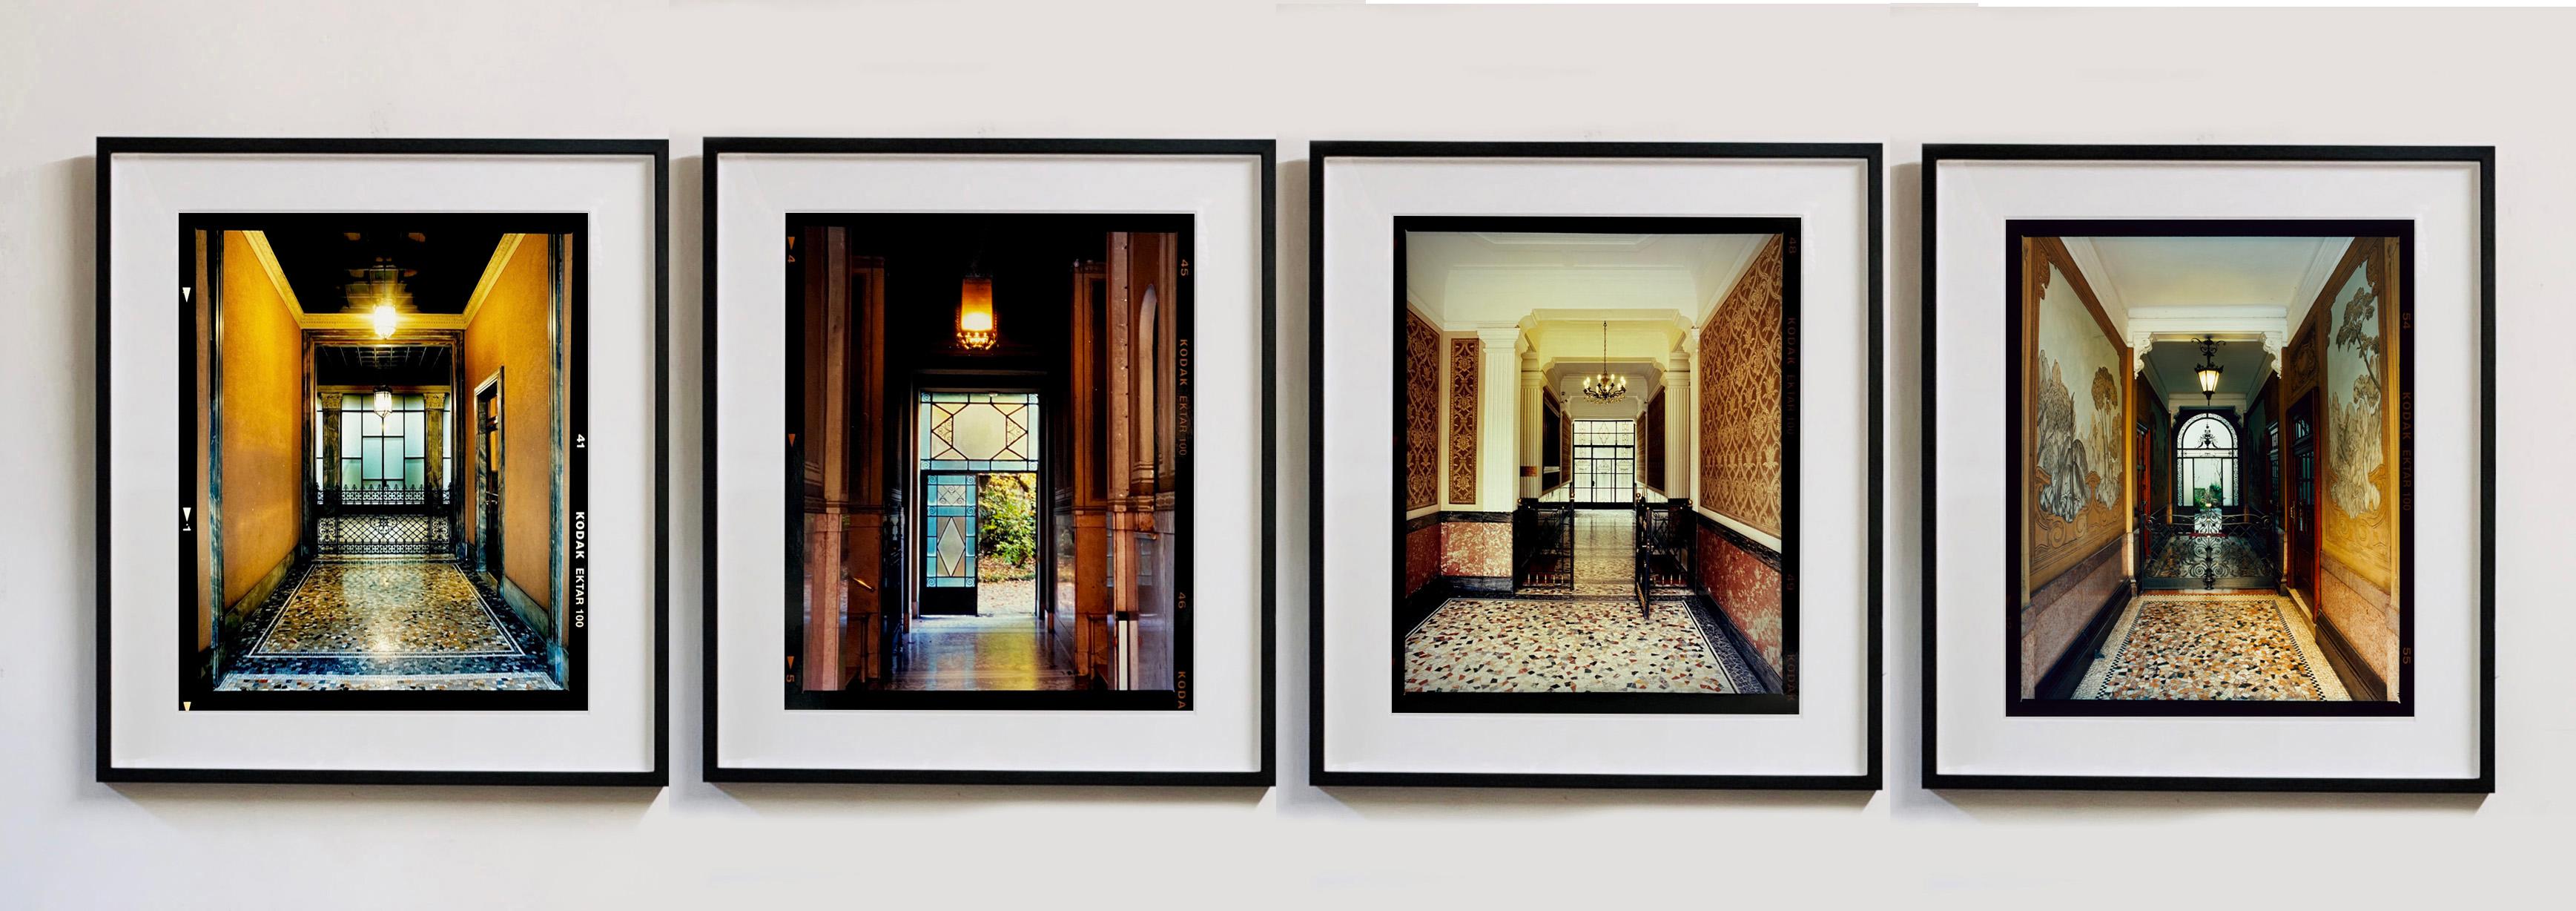 Foyer III, Milan - Italian architectural color photography For Sale 4